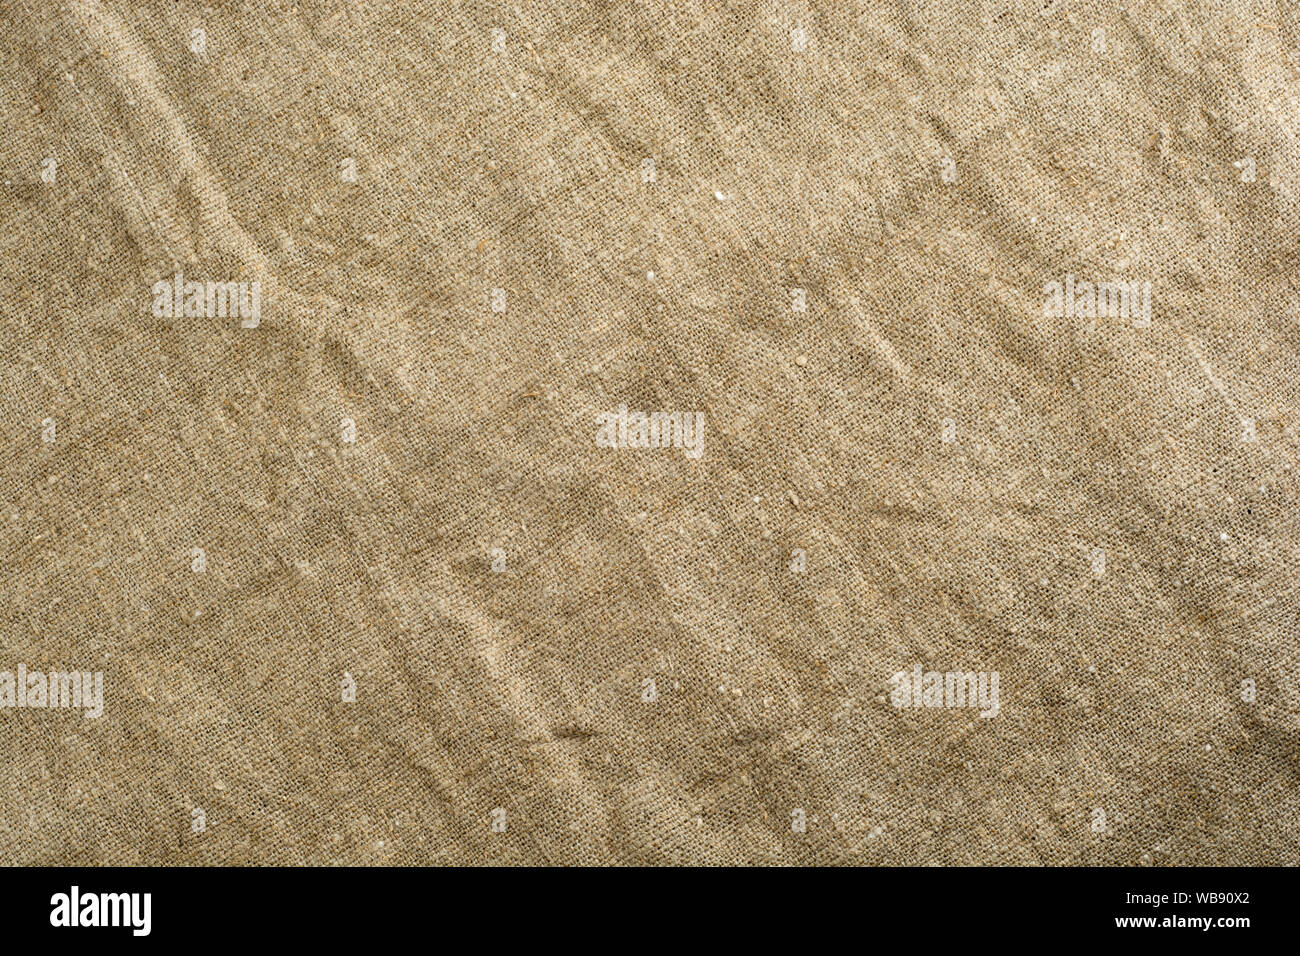 Linen canvas texture background close up. Flat lay. Stock Photo